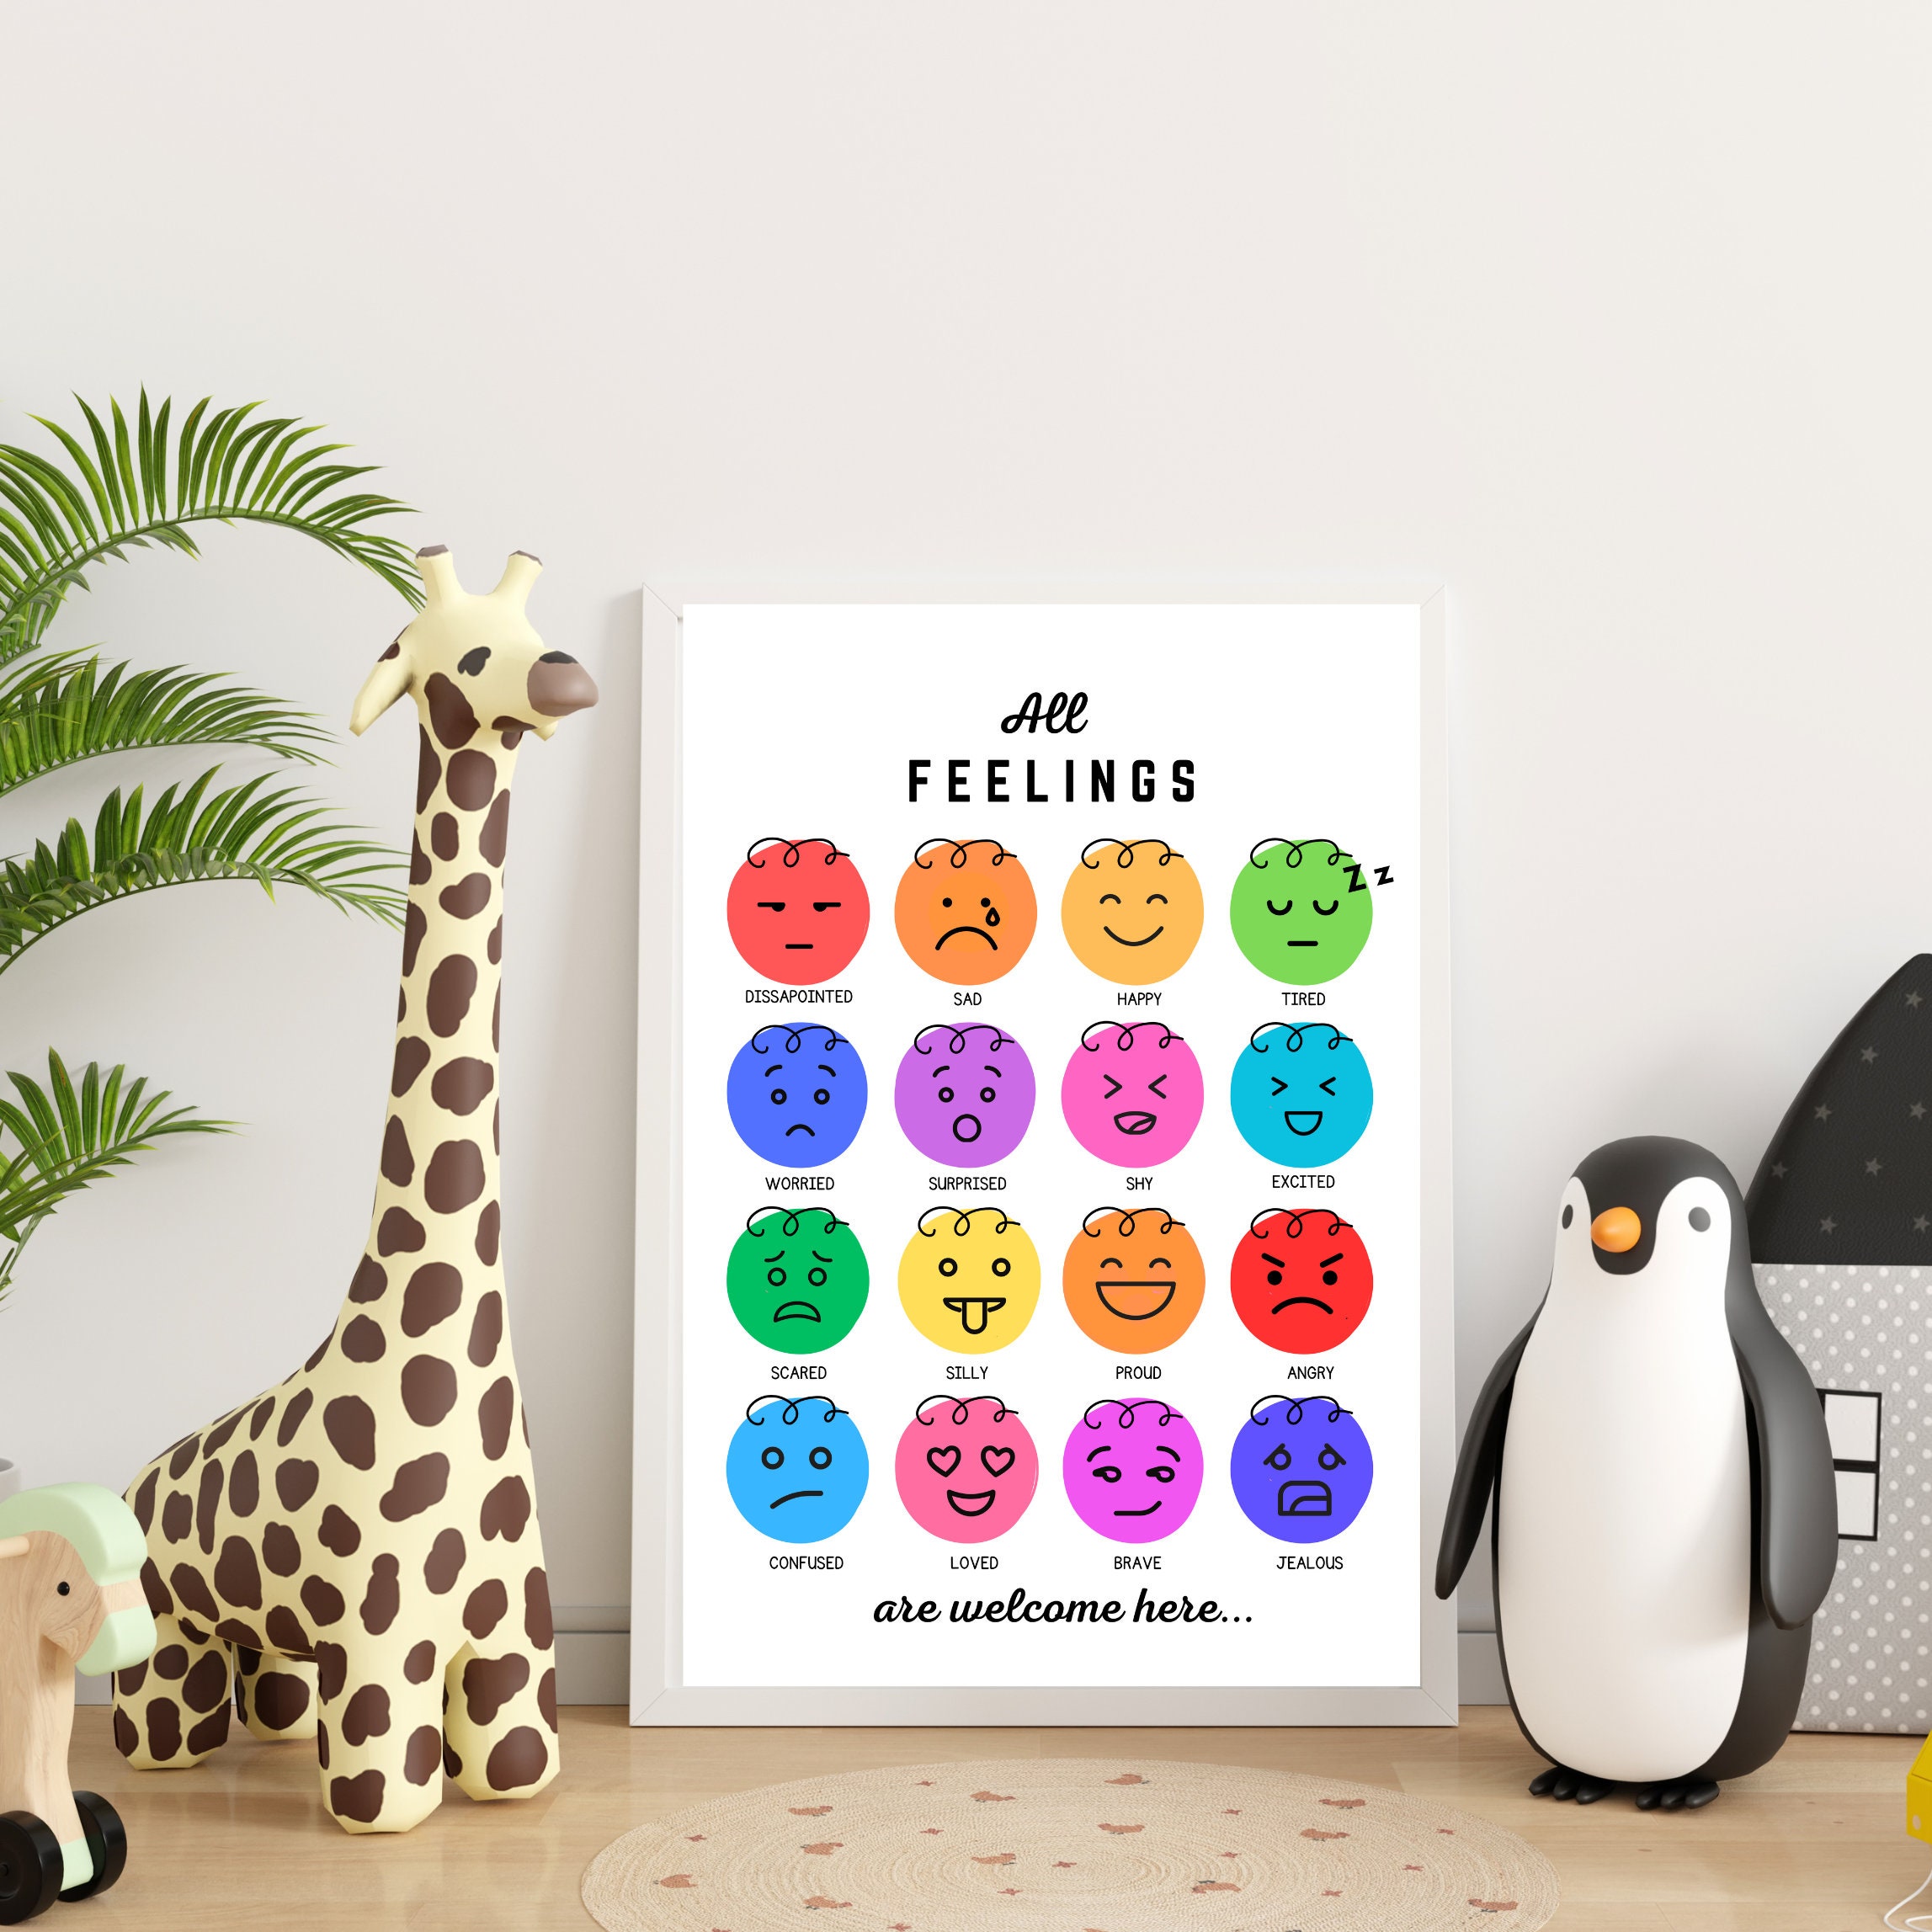 All Feelings Are Welcome Here Poster, Educational Wall Chart, Emotions ...